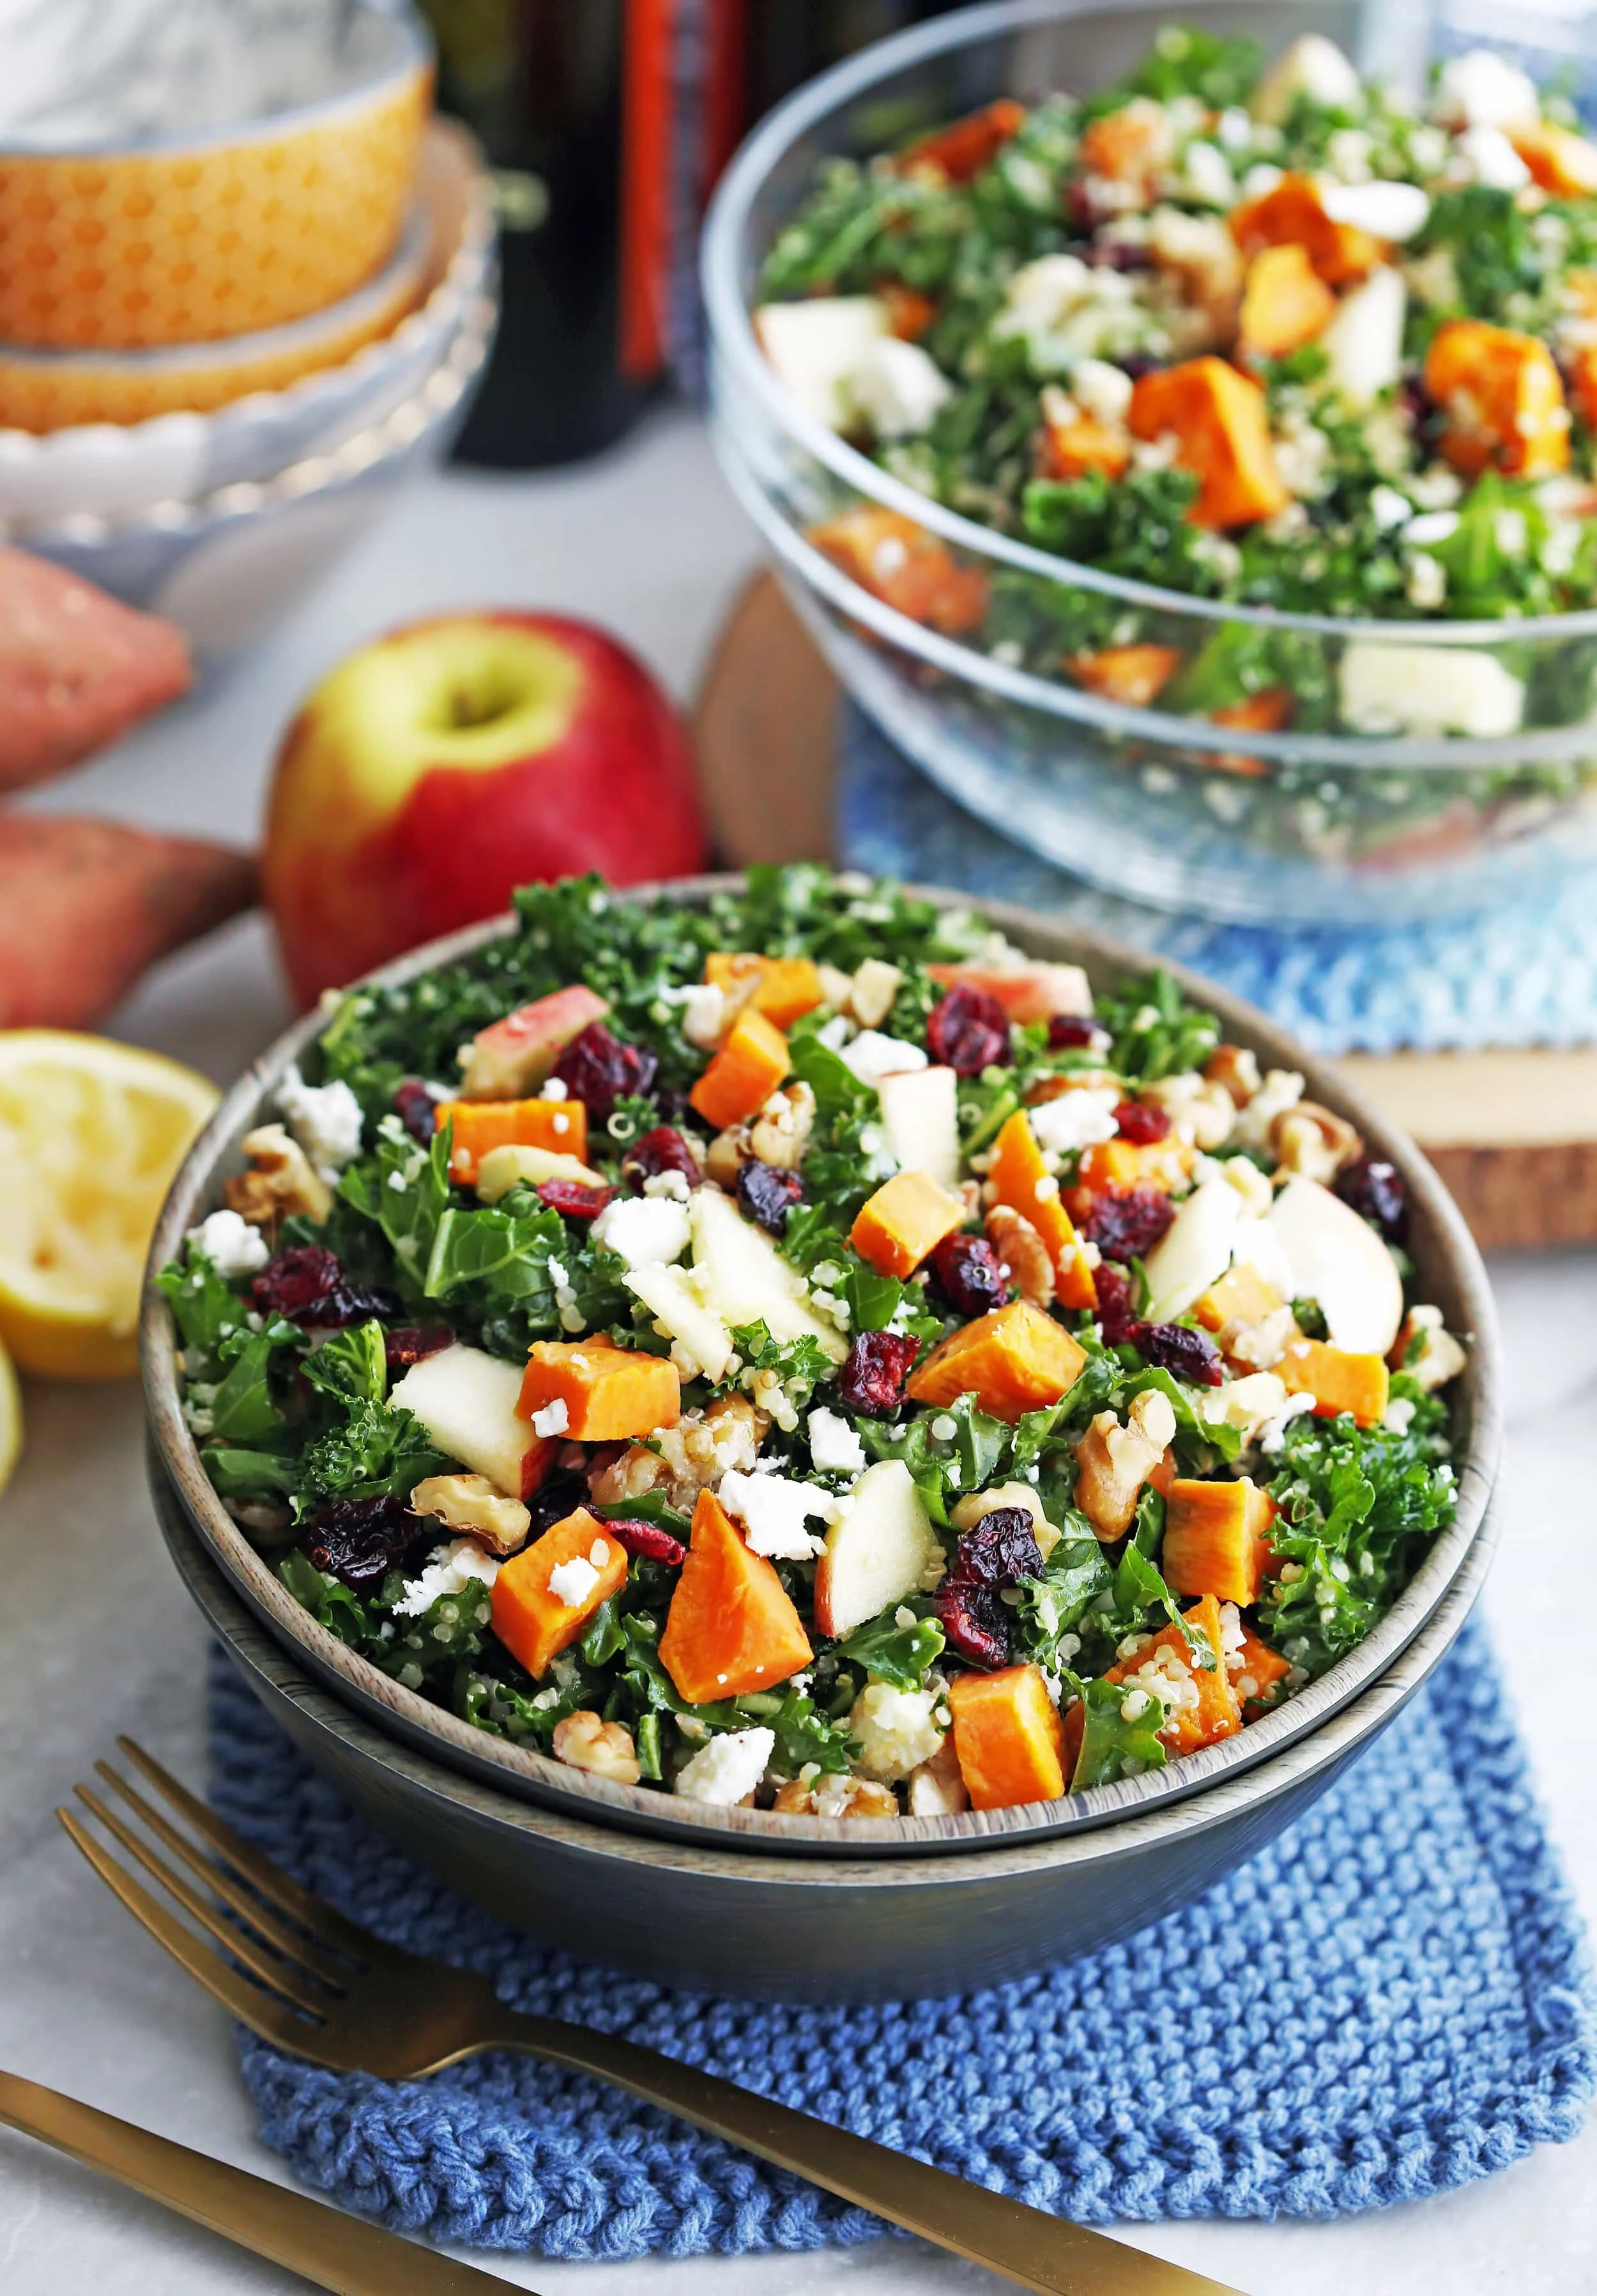 Sweet potato kale salad with feta, quinoa, dried cranberries, apple slices, and walnuts in a wooden bowl.